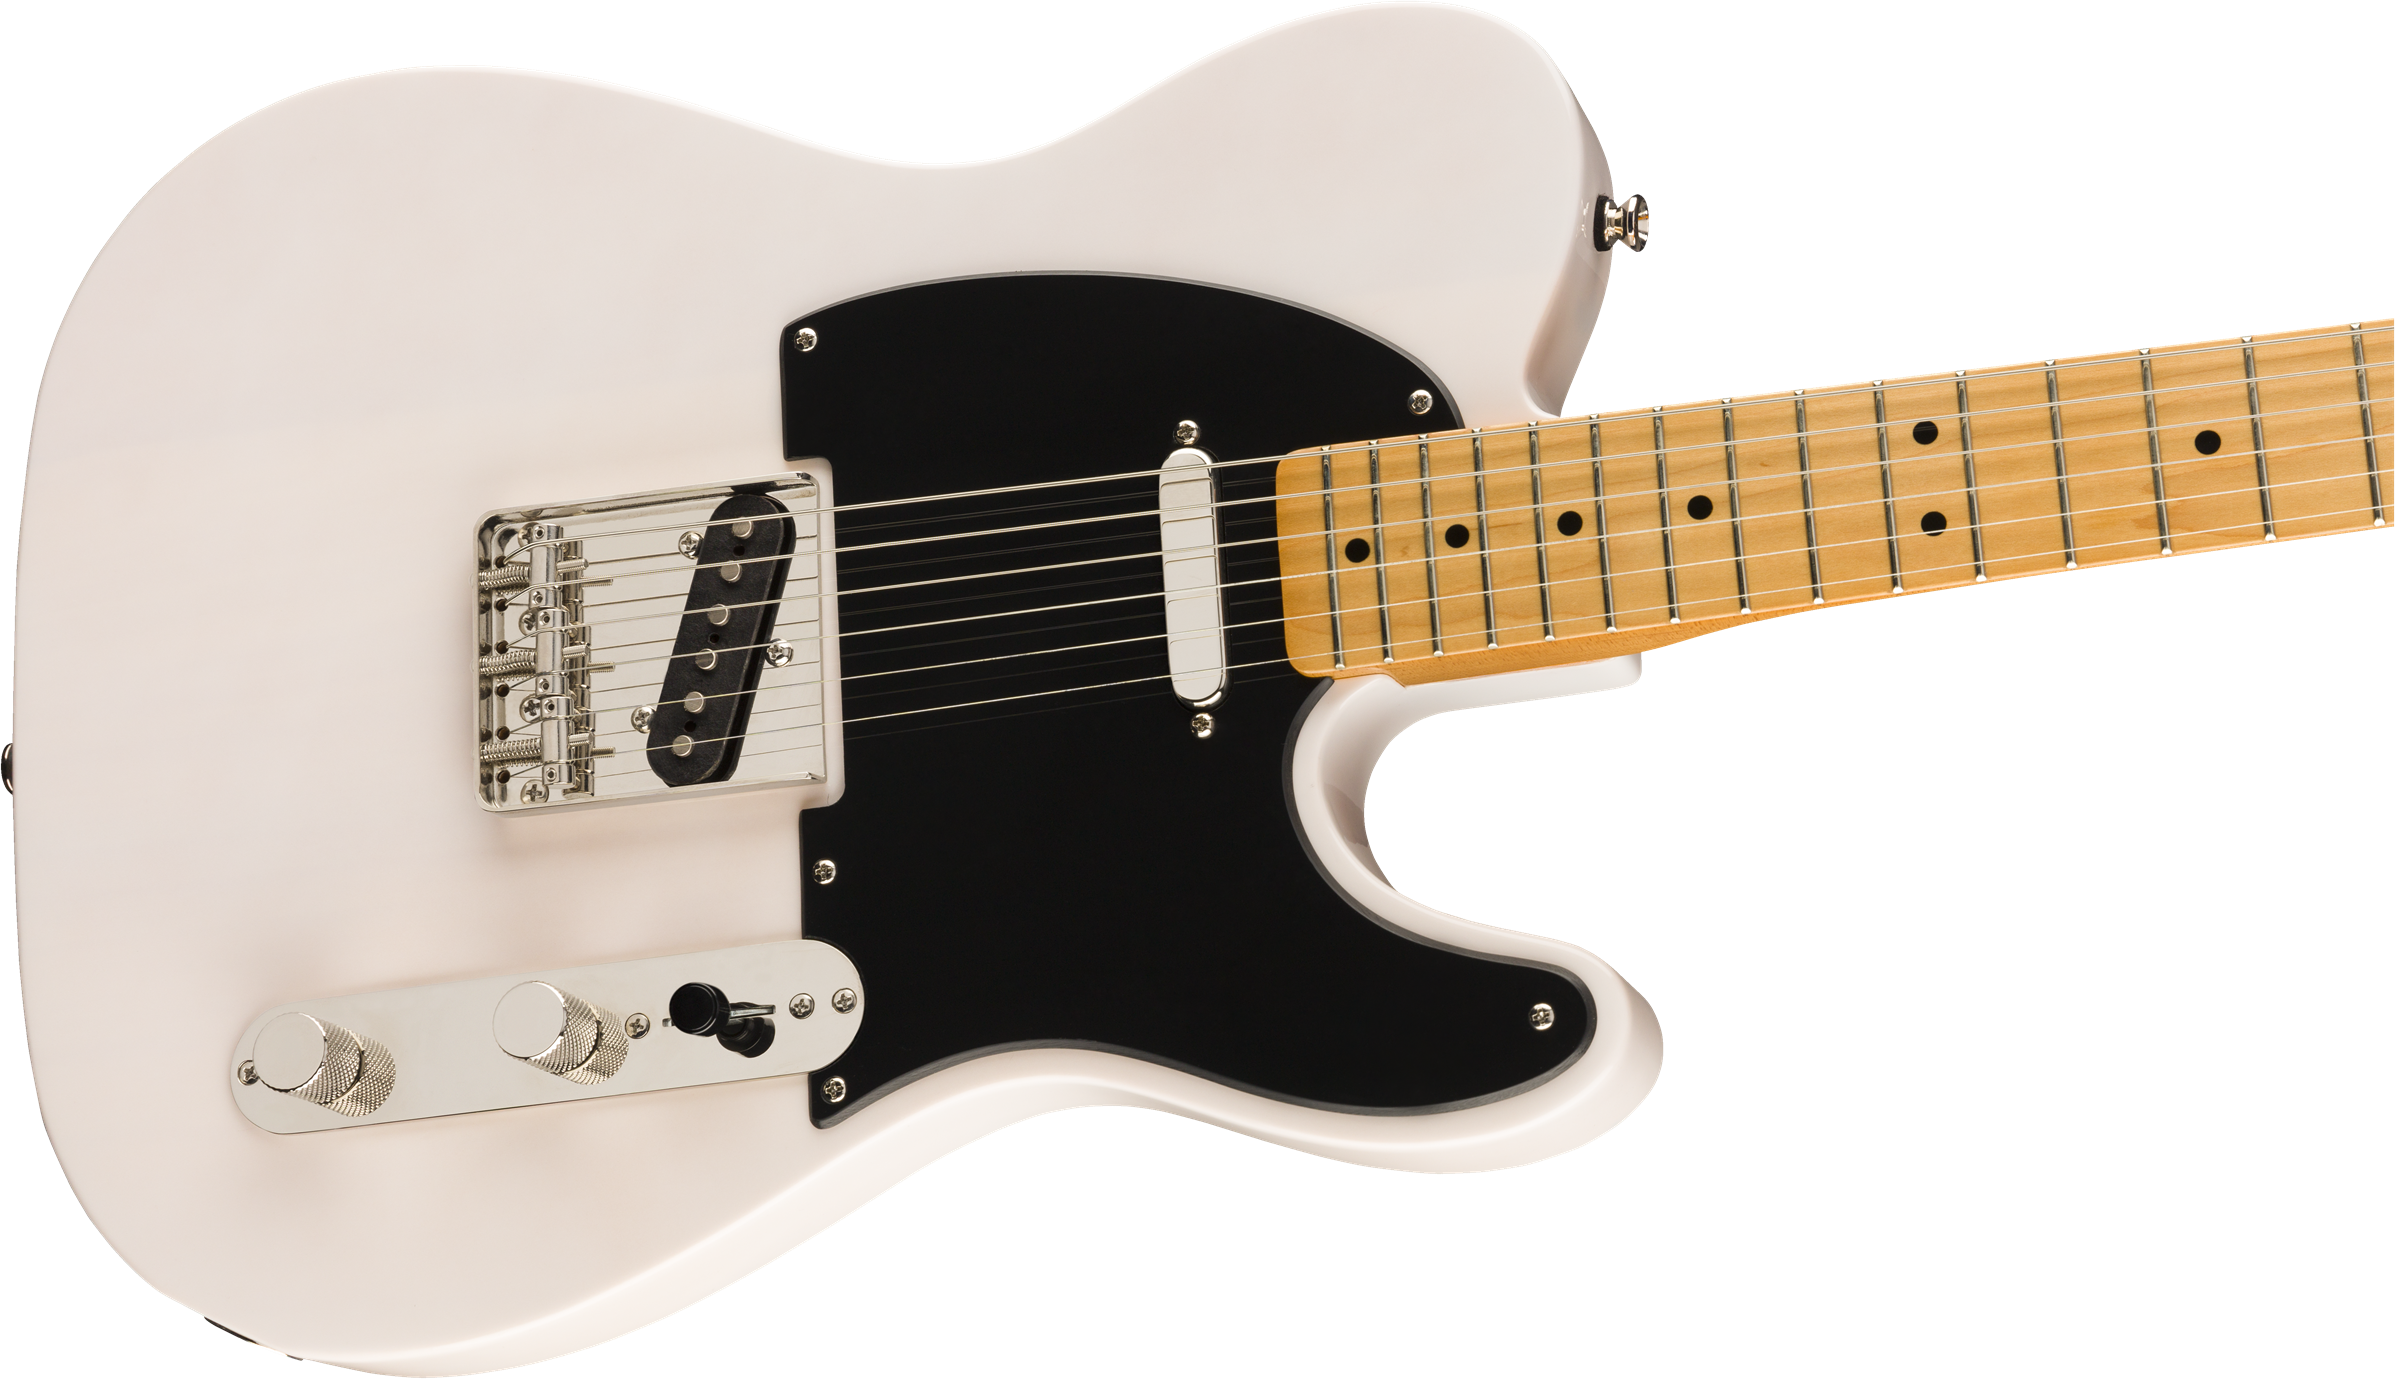 Squier Classic Vibe 50s Telecaster, Maple Fingerboard, White Blonde 0374030501